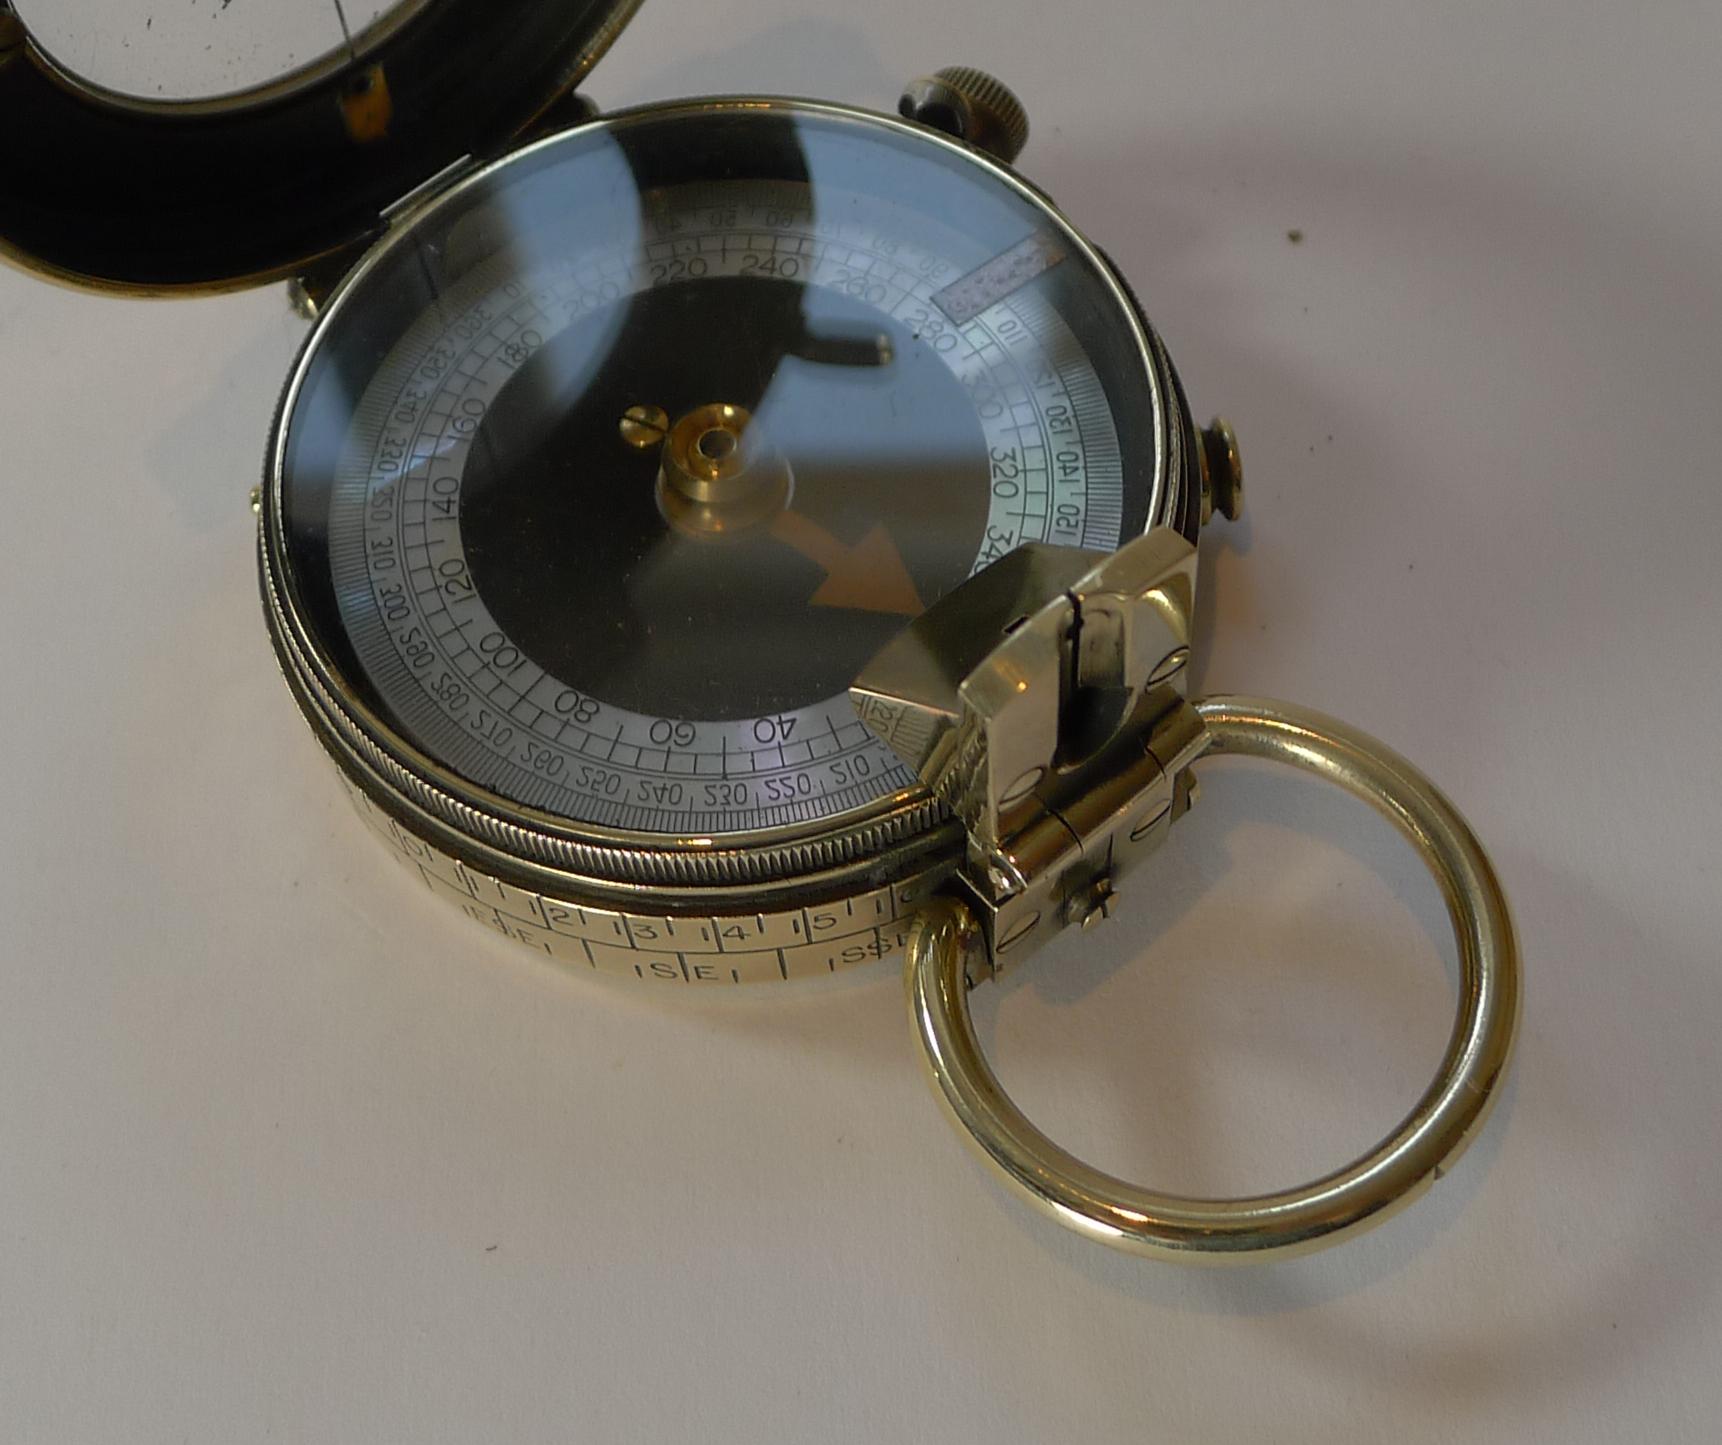 Early 20th Century WWI 1917 British Army Officer's Compass, Verner's Patent MK VIII by French Ltd